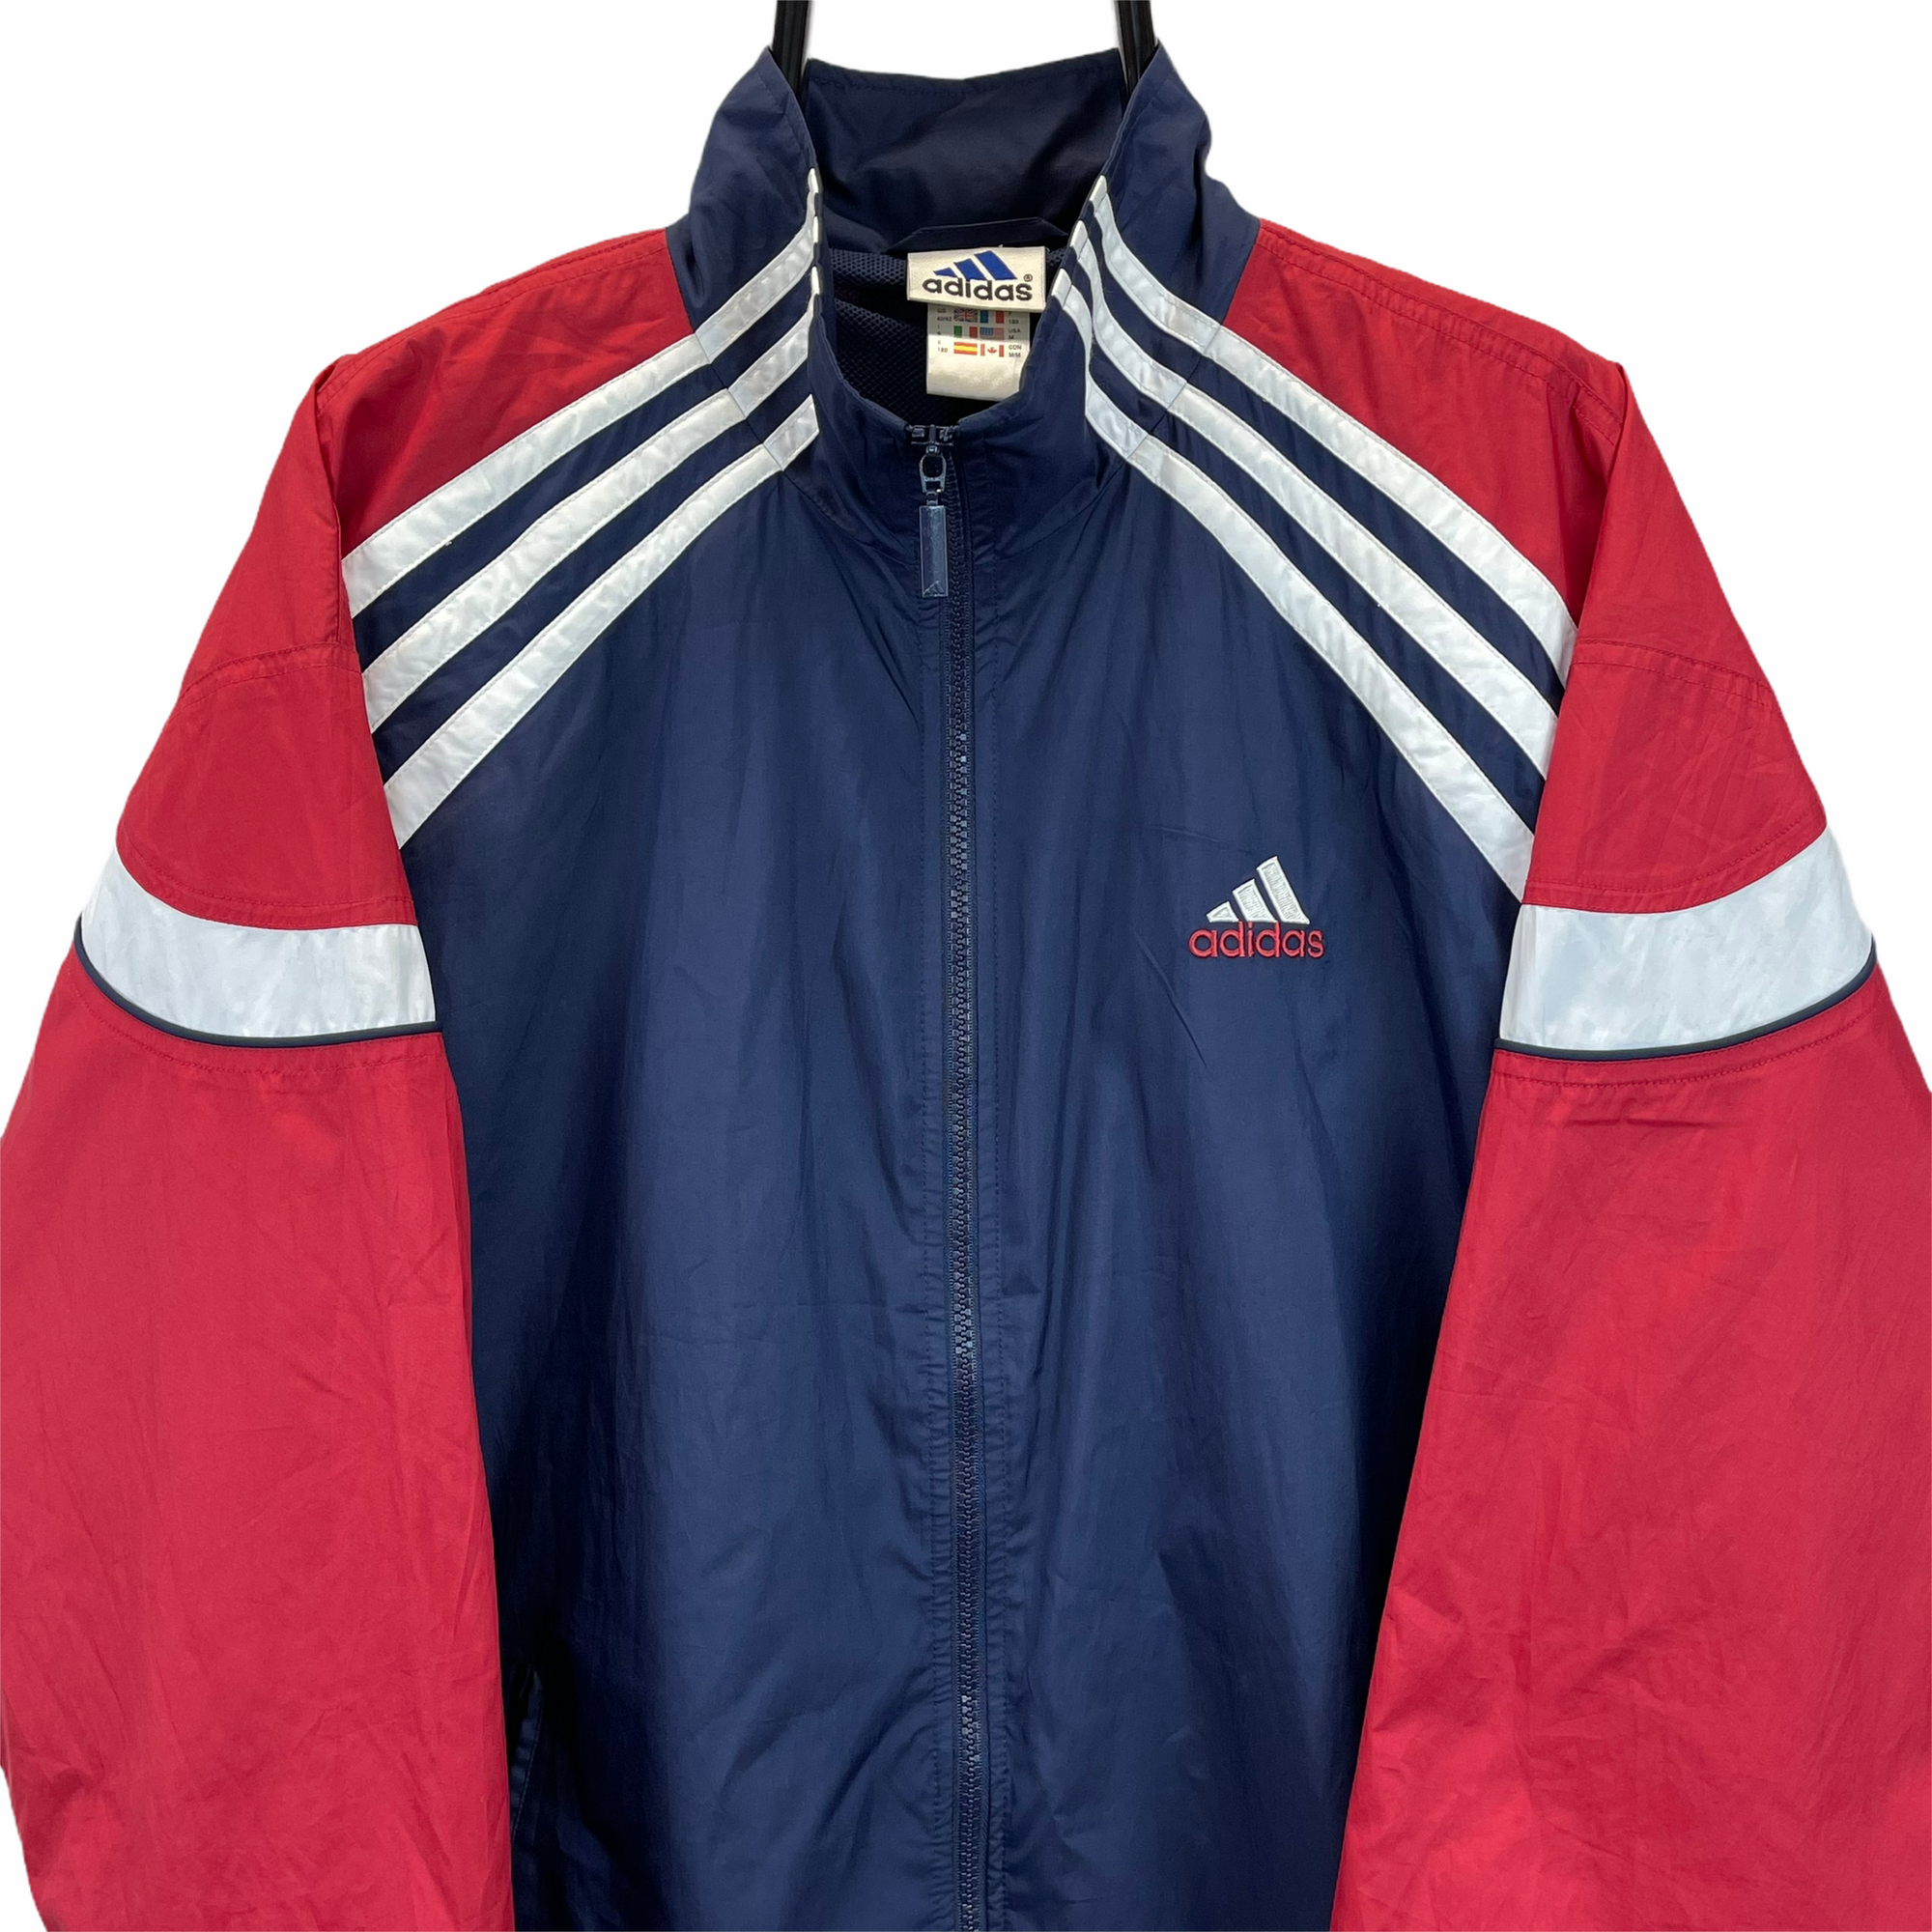 Vintage 90s Adidas Track Jacket in Red, Navy & White - Men's Large/Women's XL